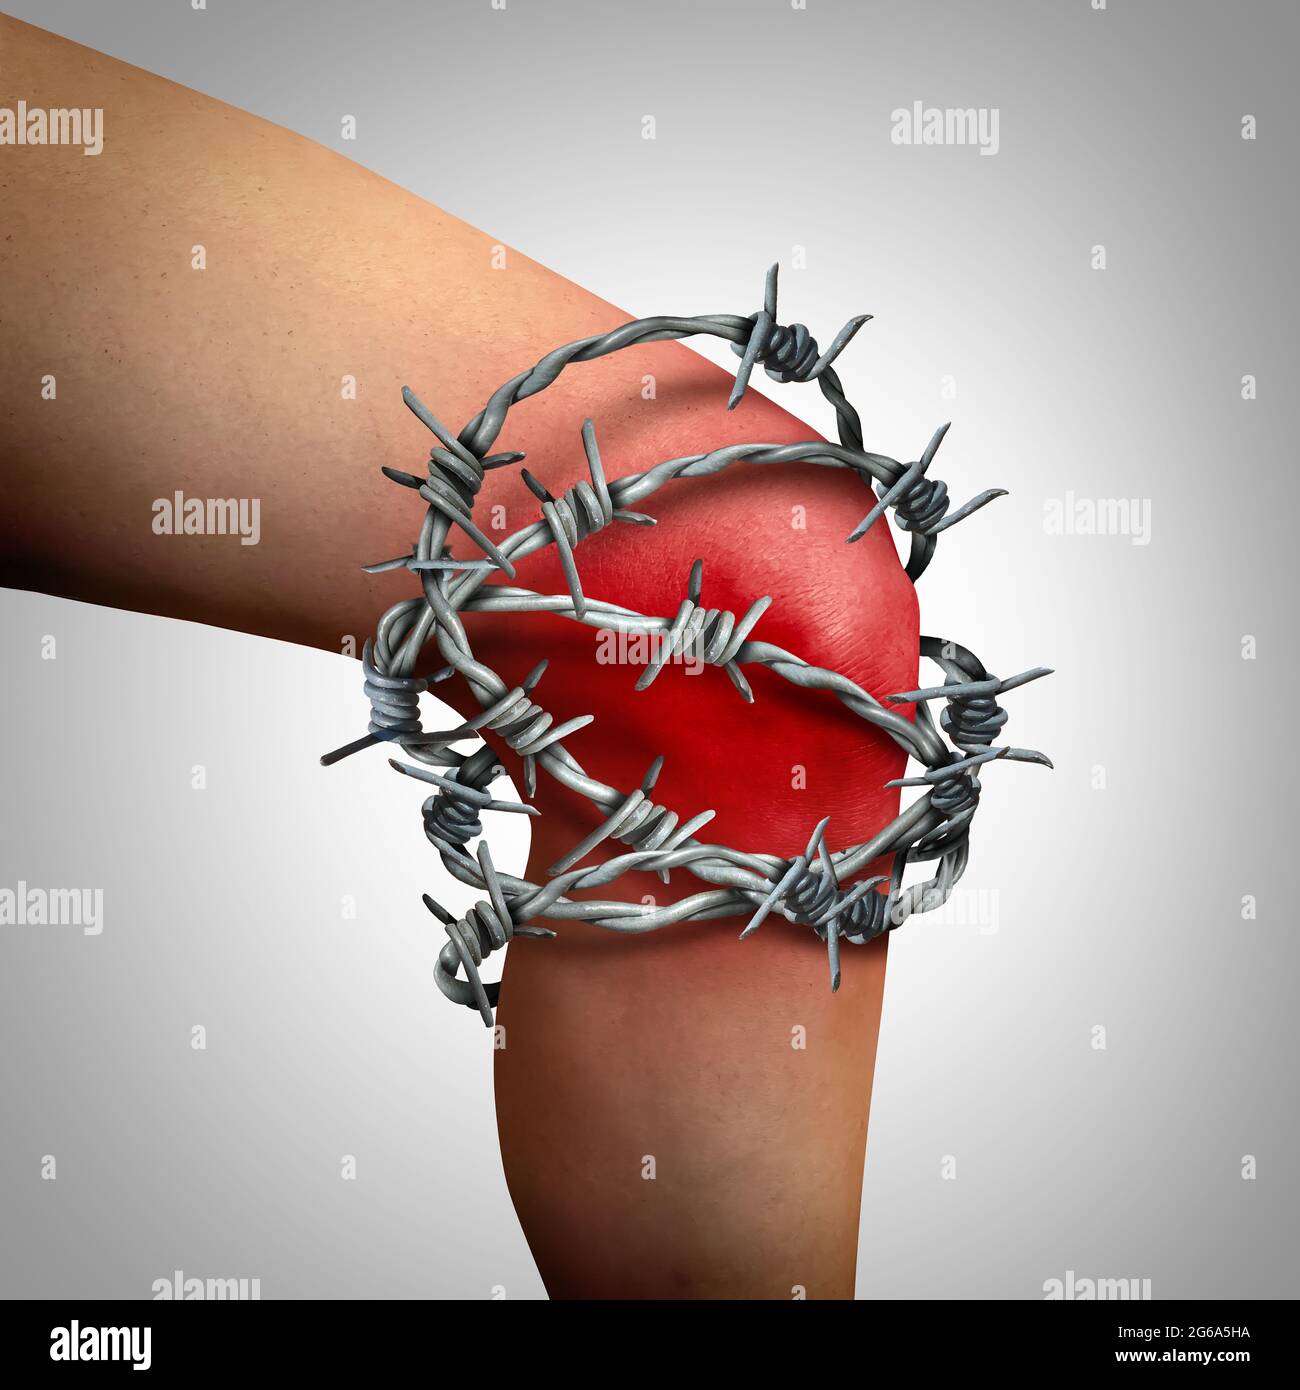 Knee joint pain and leg injury as chronic painful inflammation due to an injury or work accident in a 3D illustration style. Stock Photo